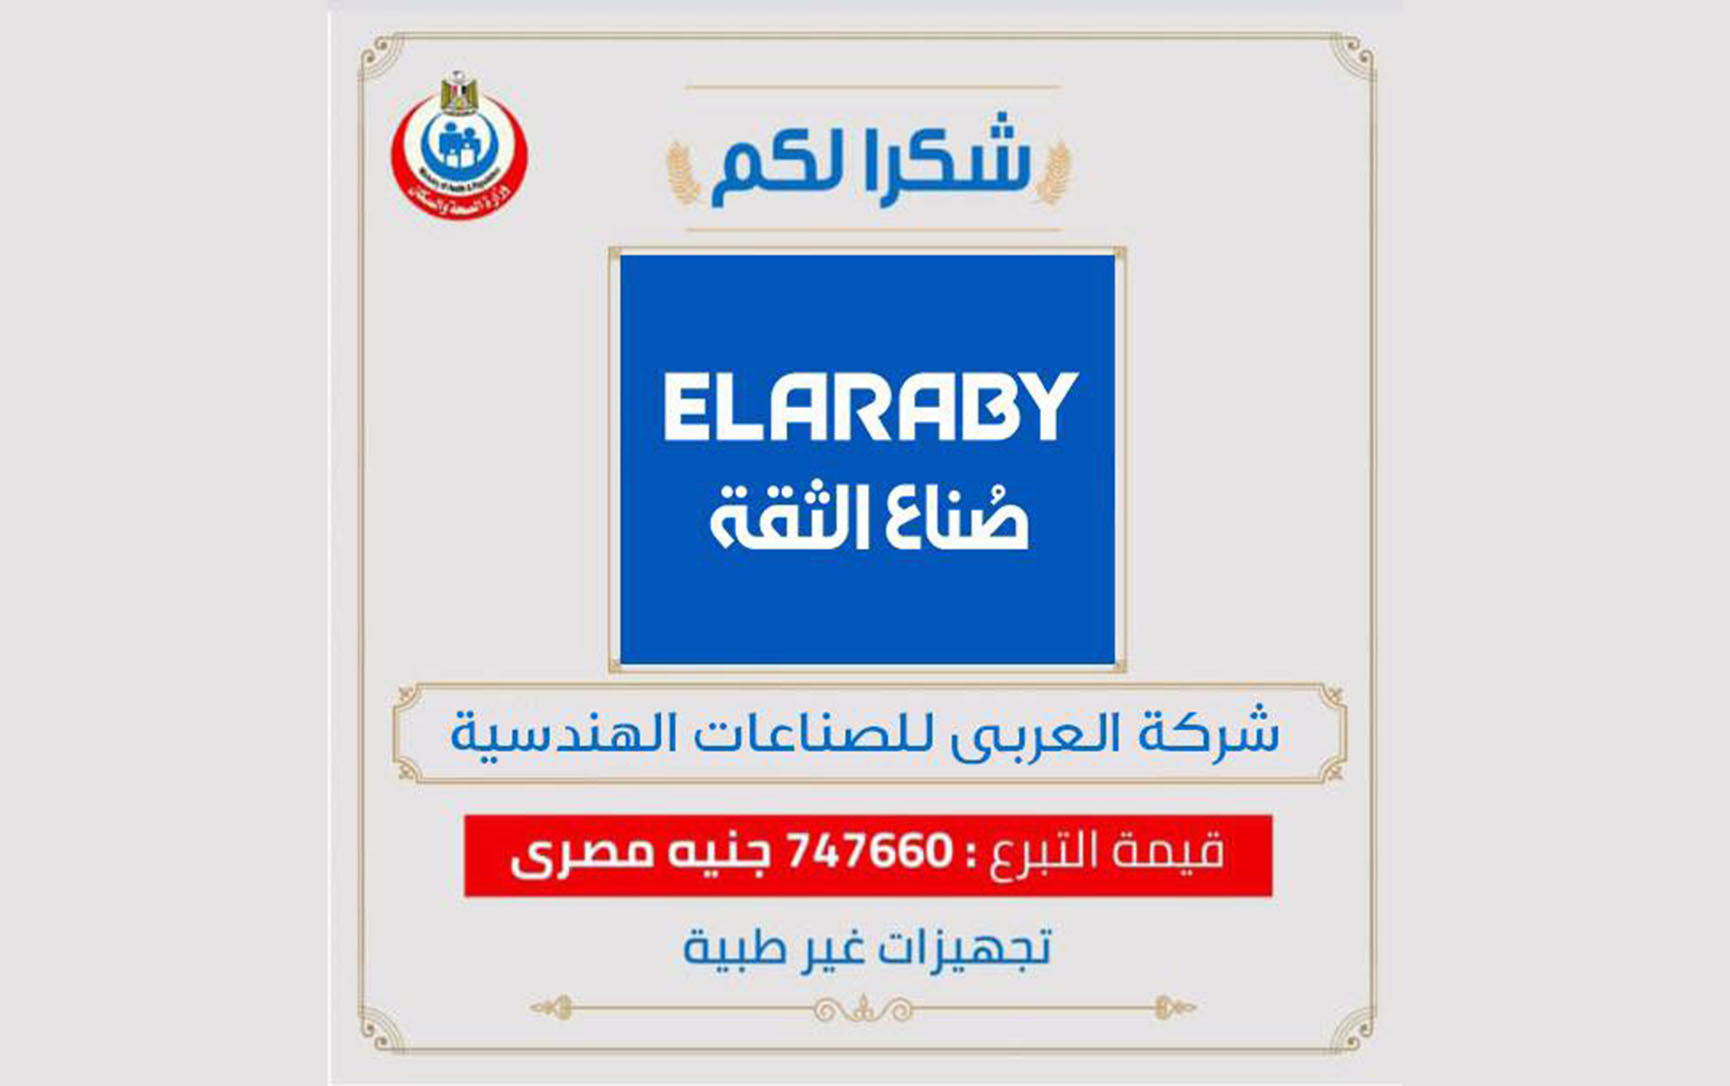 The Ministry of Health extends its thanks to ElAraby Group, in appreciation of its effective contribution to overcoming Corona crisis